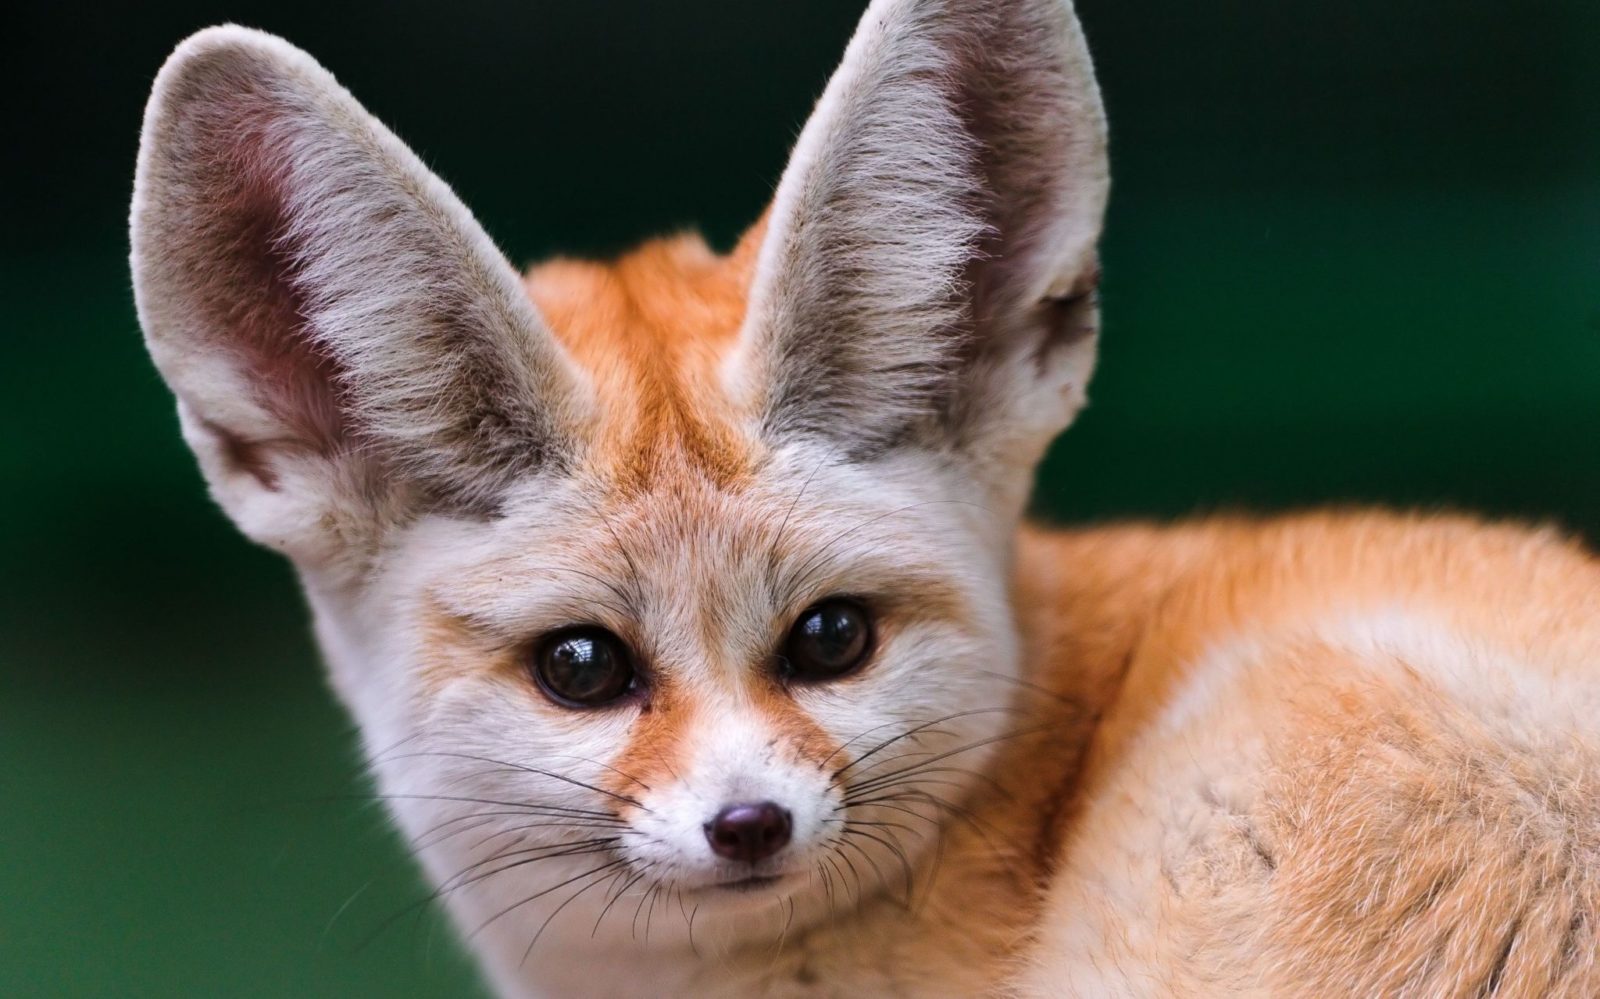 Fennec Fox As Pets Things To Know Before Taking Them As Pets,What Is Vegan Butter